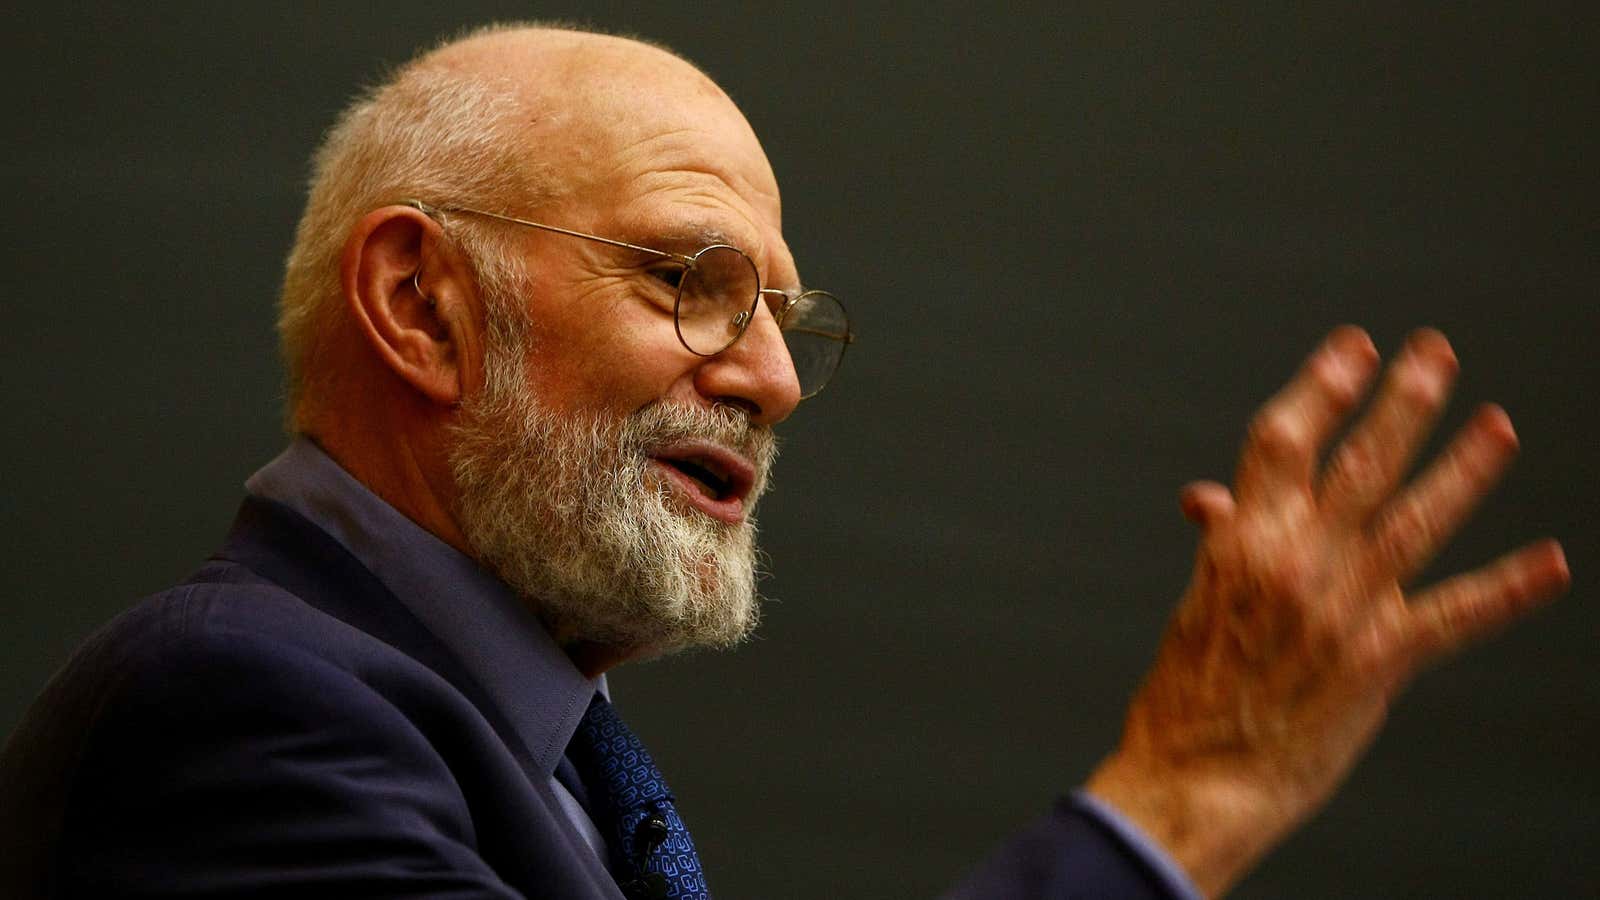 Oliver Sacks writes about his dangerous hobby in his autobiography On The Move.